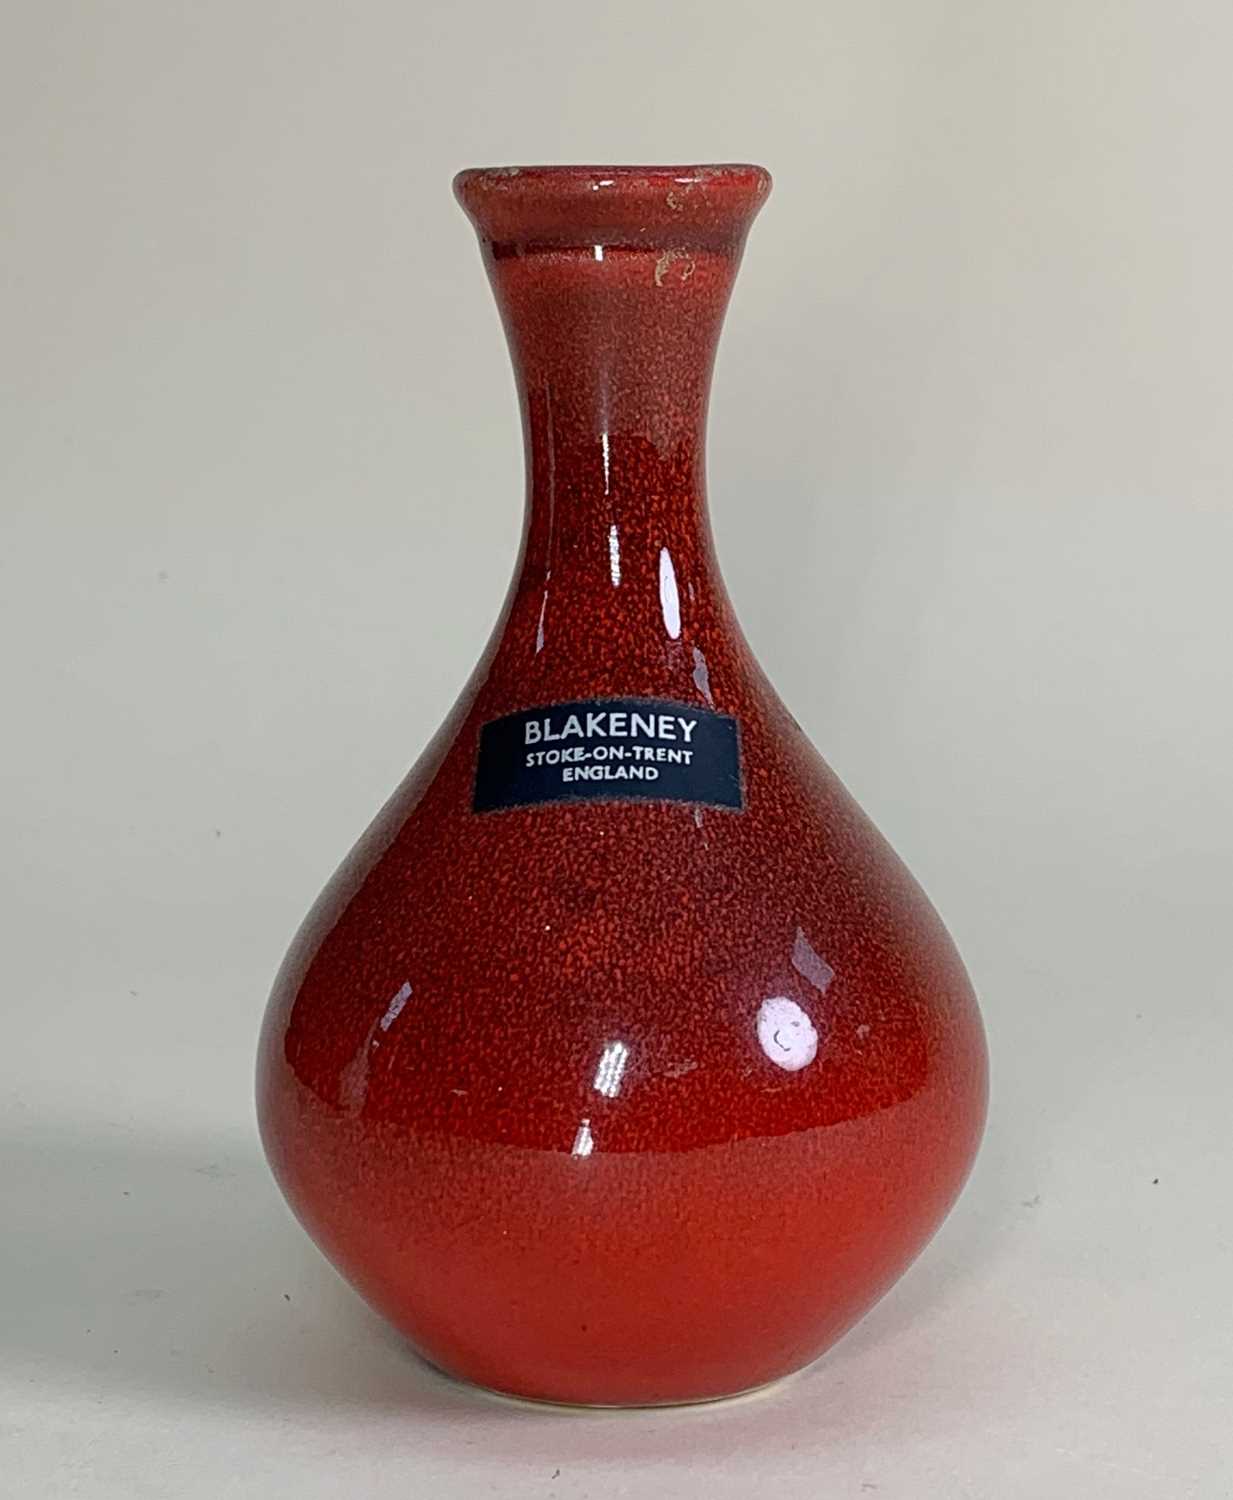 MID CENTURY POTTERY WGP KERAMICS COLLECTION including one Scheurich 275-28 solid red glazed vase - Image 16 of 20